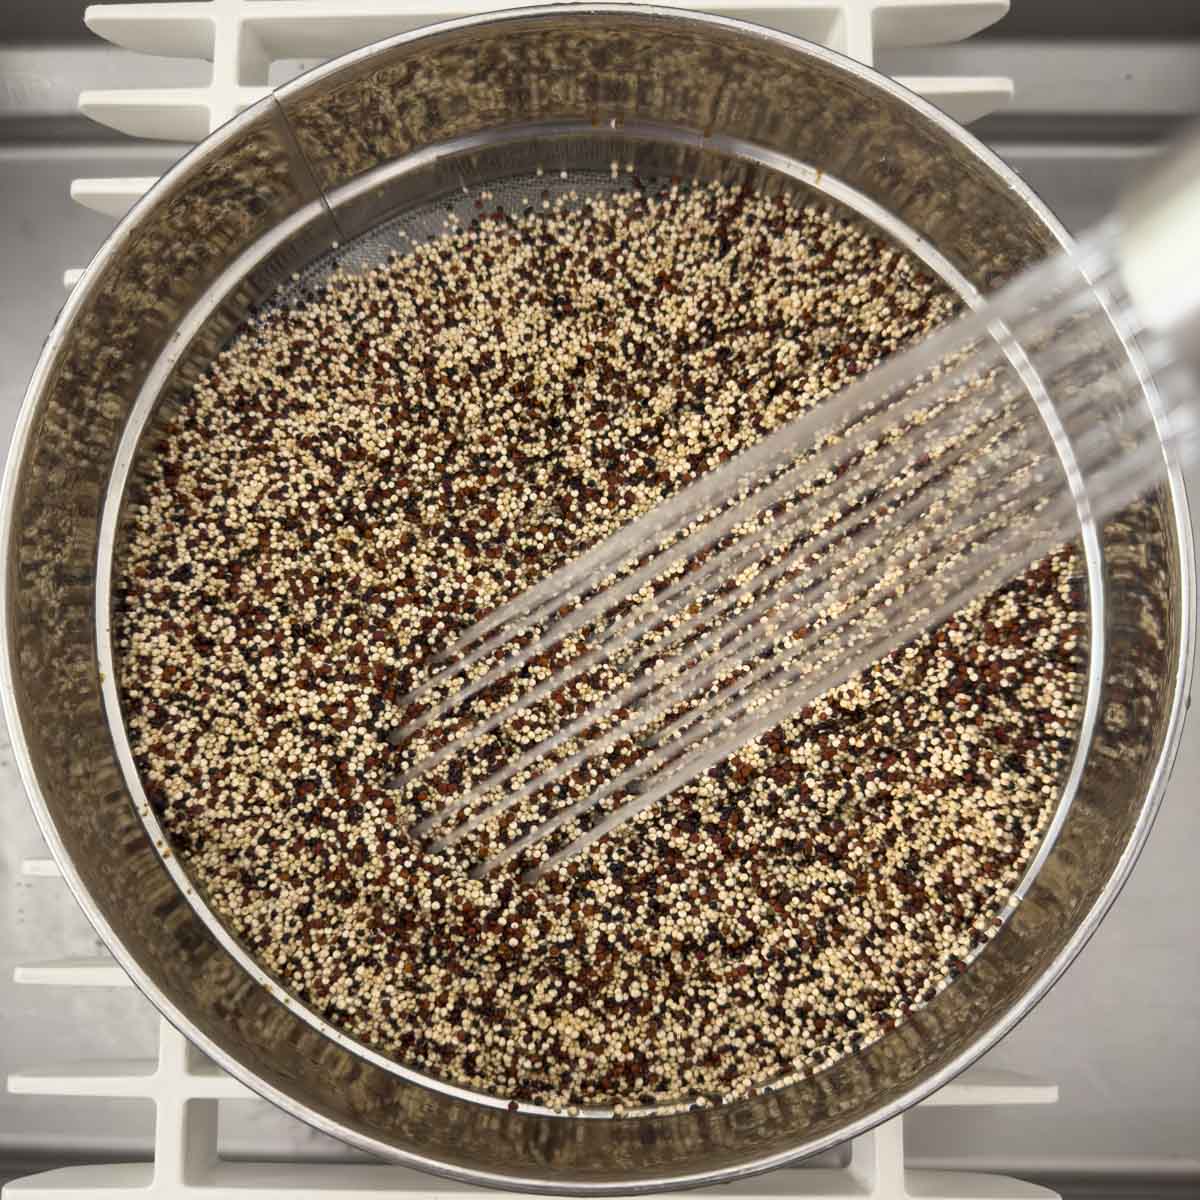 Rinsing tri-color quinoa in a sieve with a sprayer. 